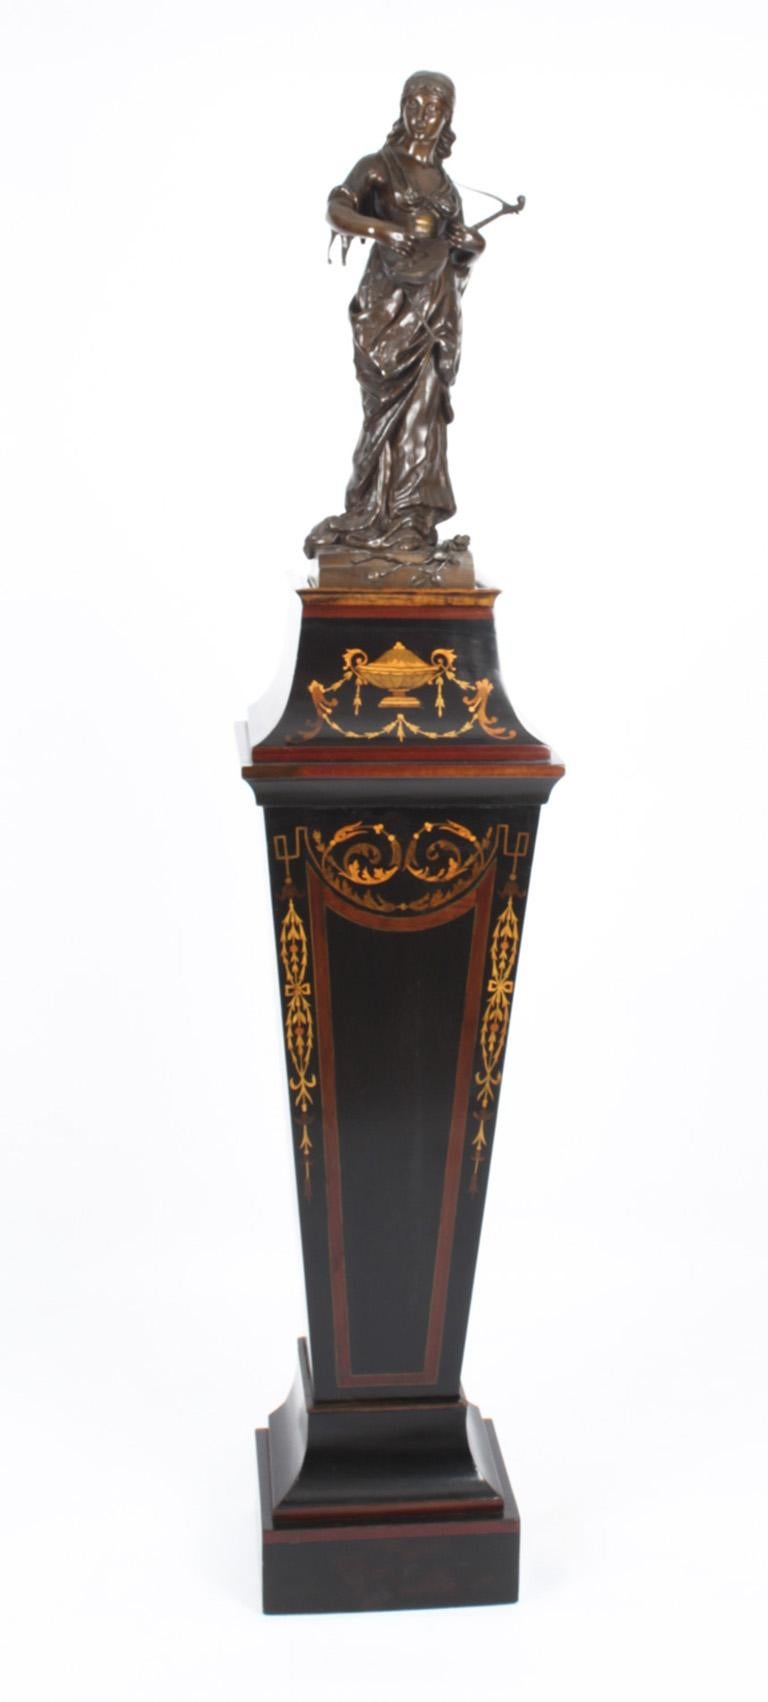 A superb late Victorian ebonised, crossbanded and marquetry pedestal, C1890 in date.

The pedestal superbly inlaid with a marquetry of ribbon tied urns, scrolling leaves and husks, with an inset marble top.

Condition:
In excellent condition